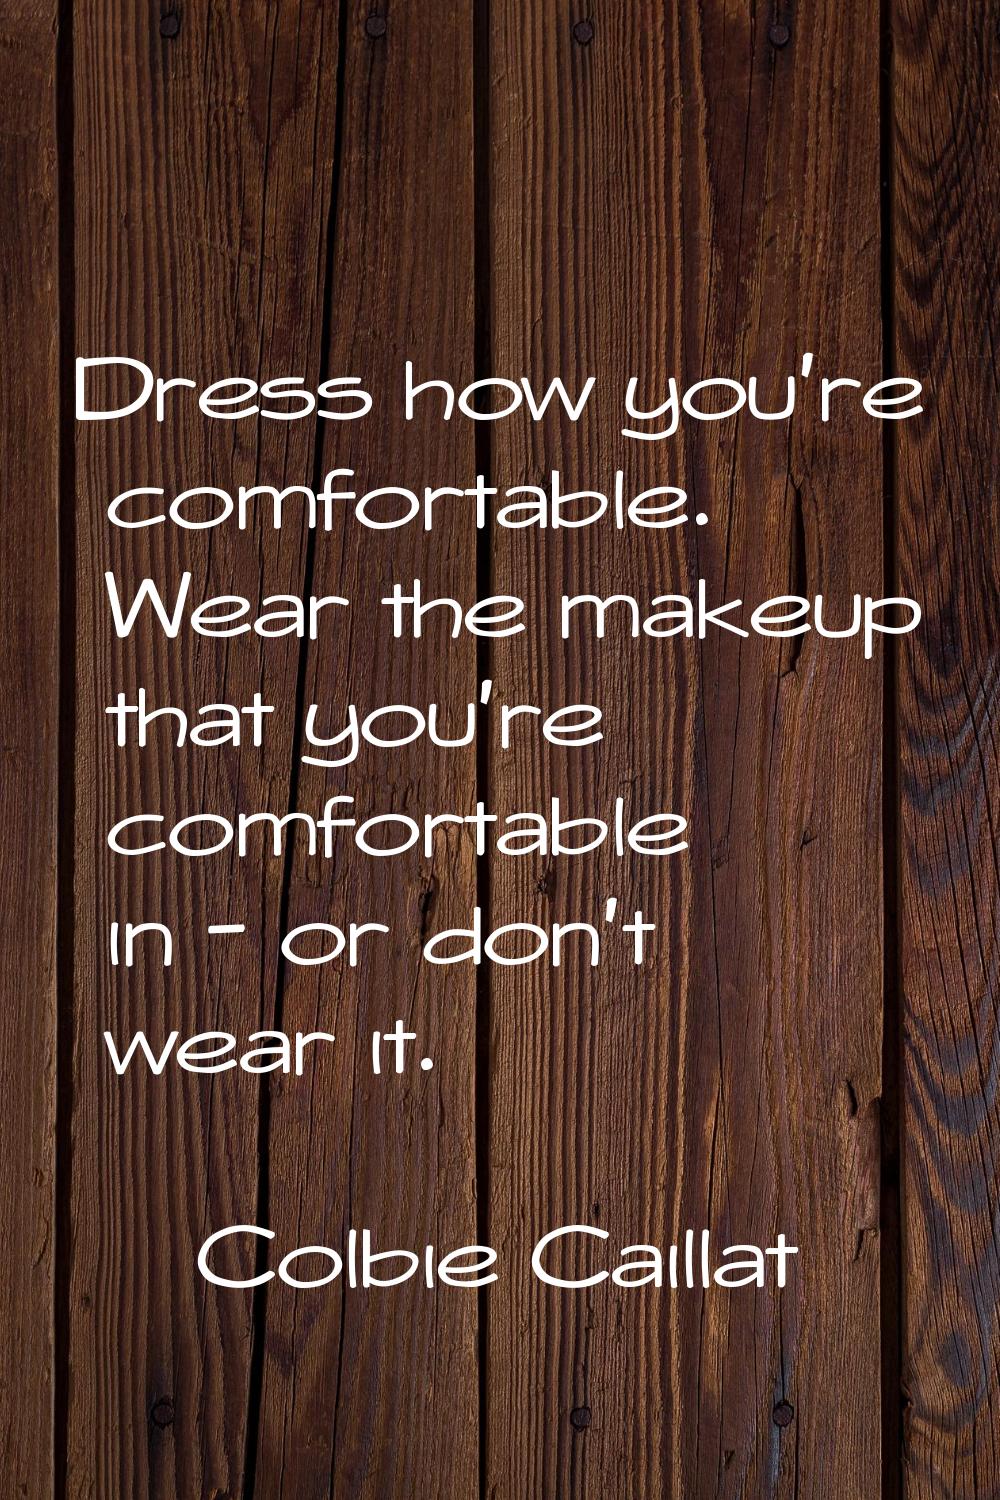 Dress how you're comfortable. Wear the makeup that you're comfortable in - or don't wear it.